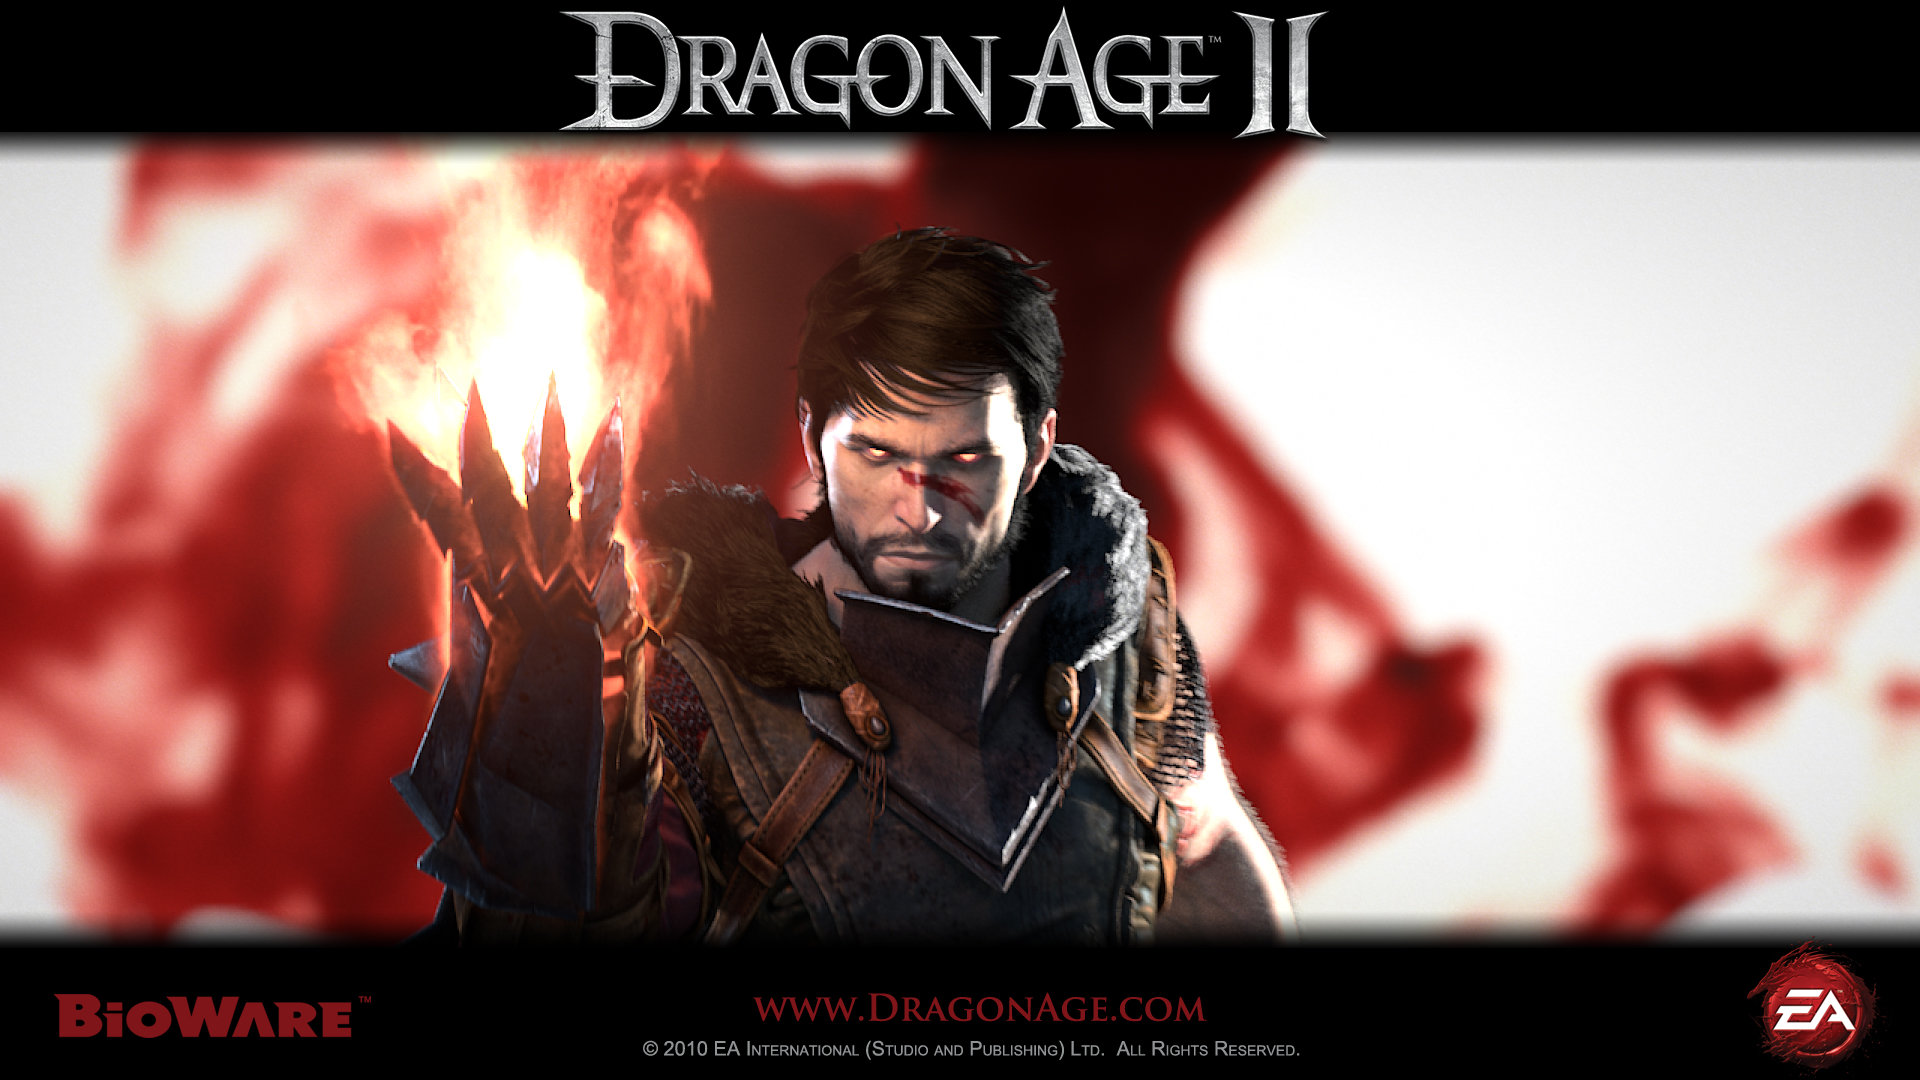 Download full hd 1920x1080 Dragon Age 2 PC wallpaper ID:295667 for free